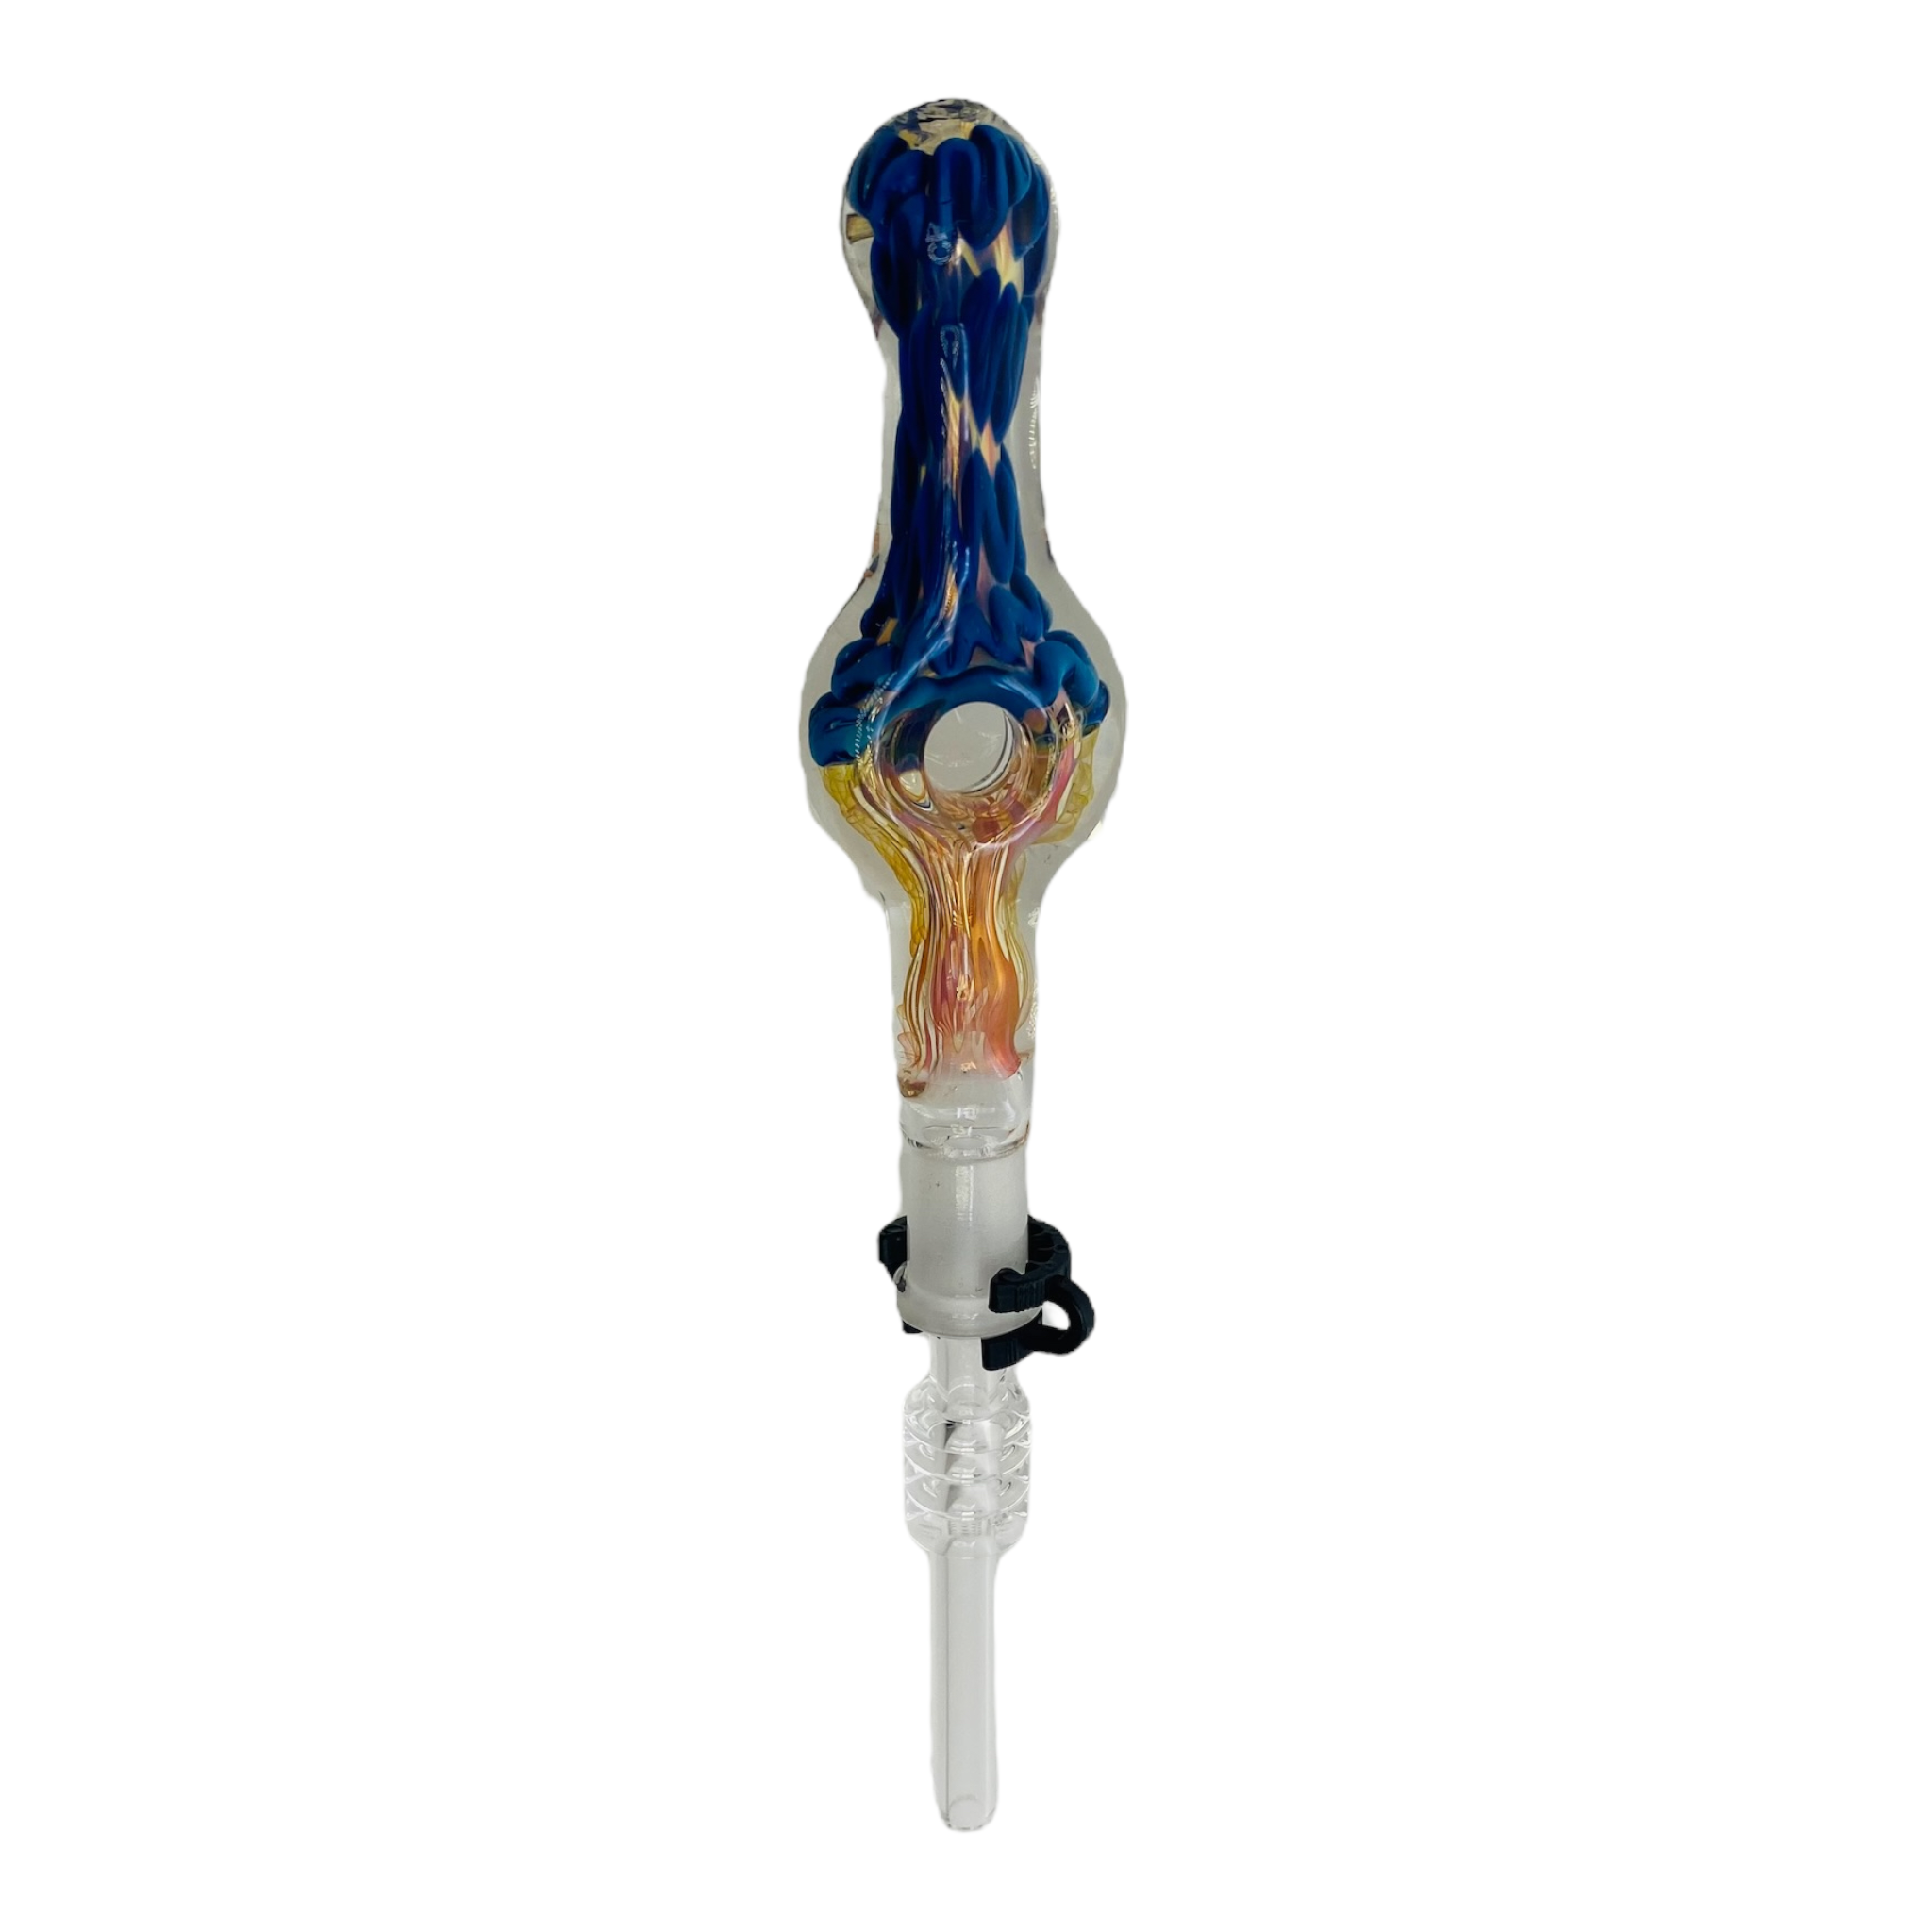 10mm Nectar Collector - Blue And Fume Inside Out Donut With Quartz Tip